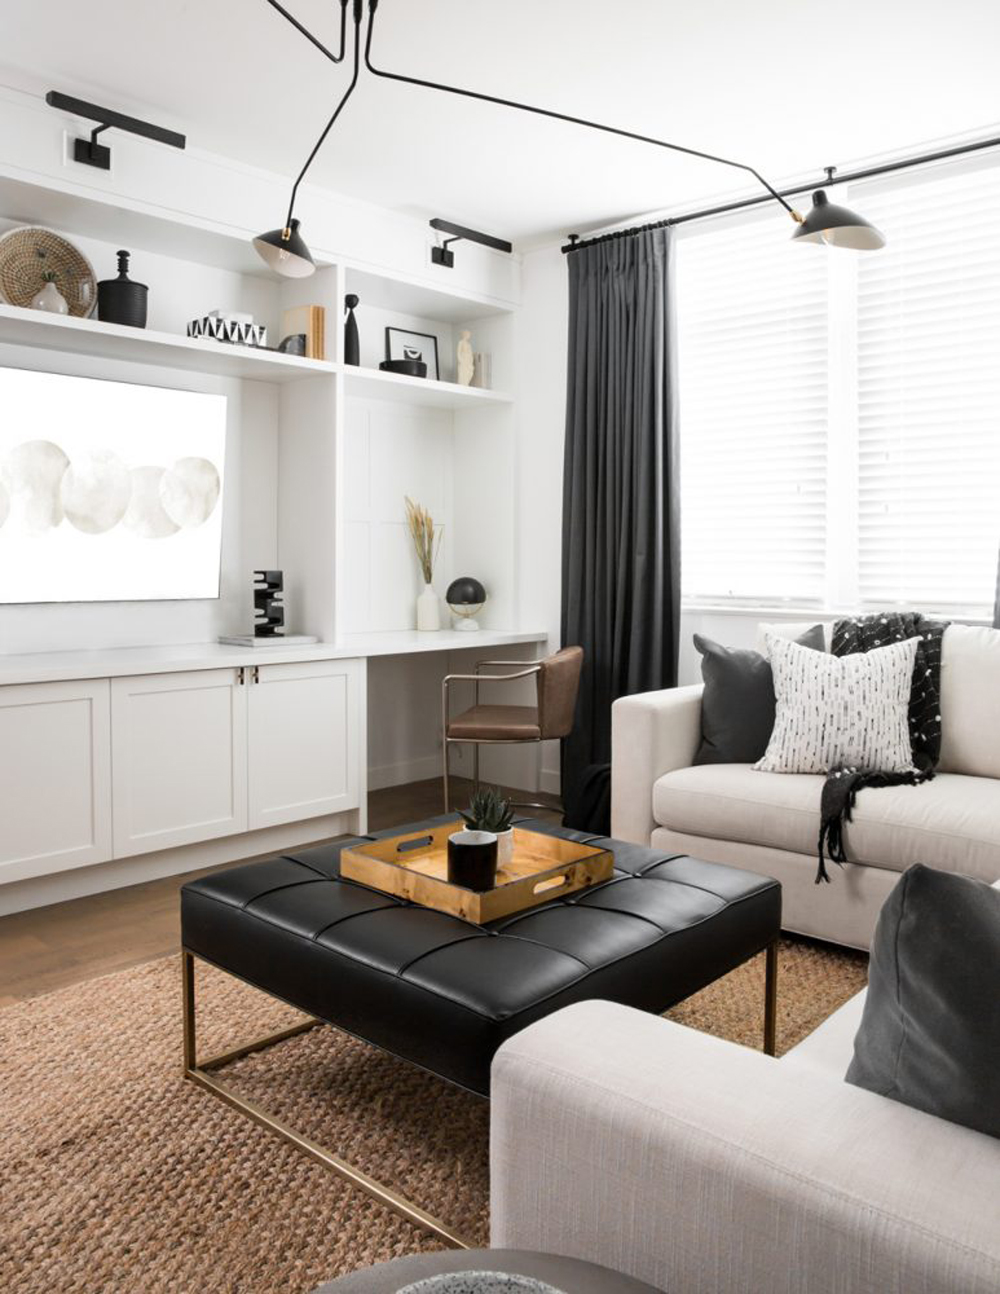 A black and white renovated living room with plenty of custom storage and sleek, contemporary furniture